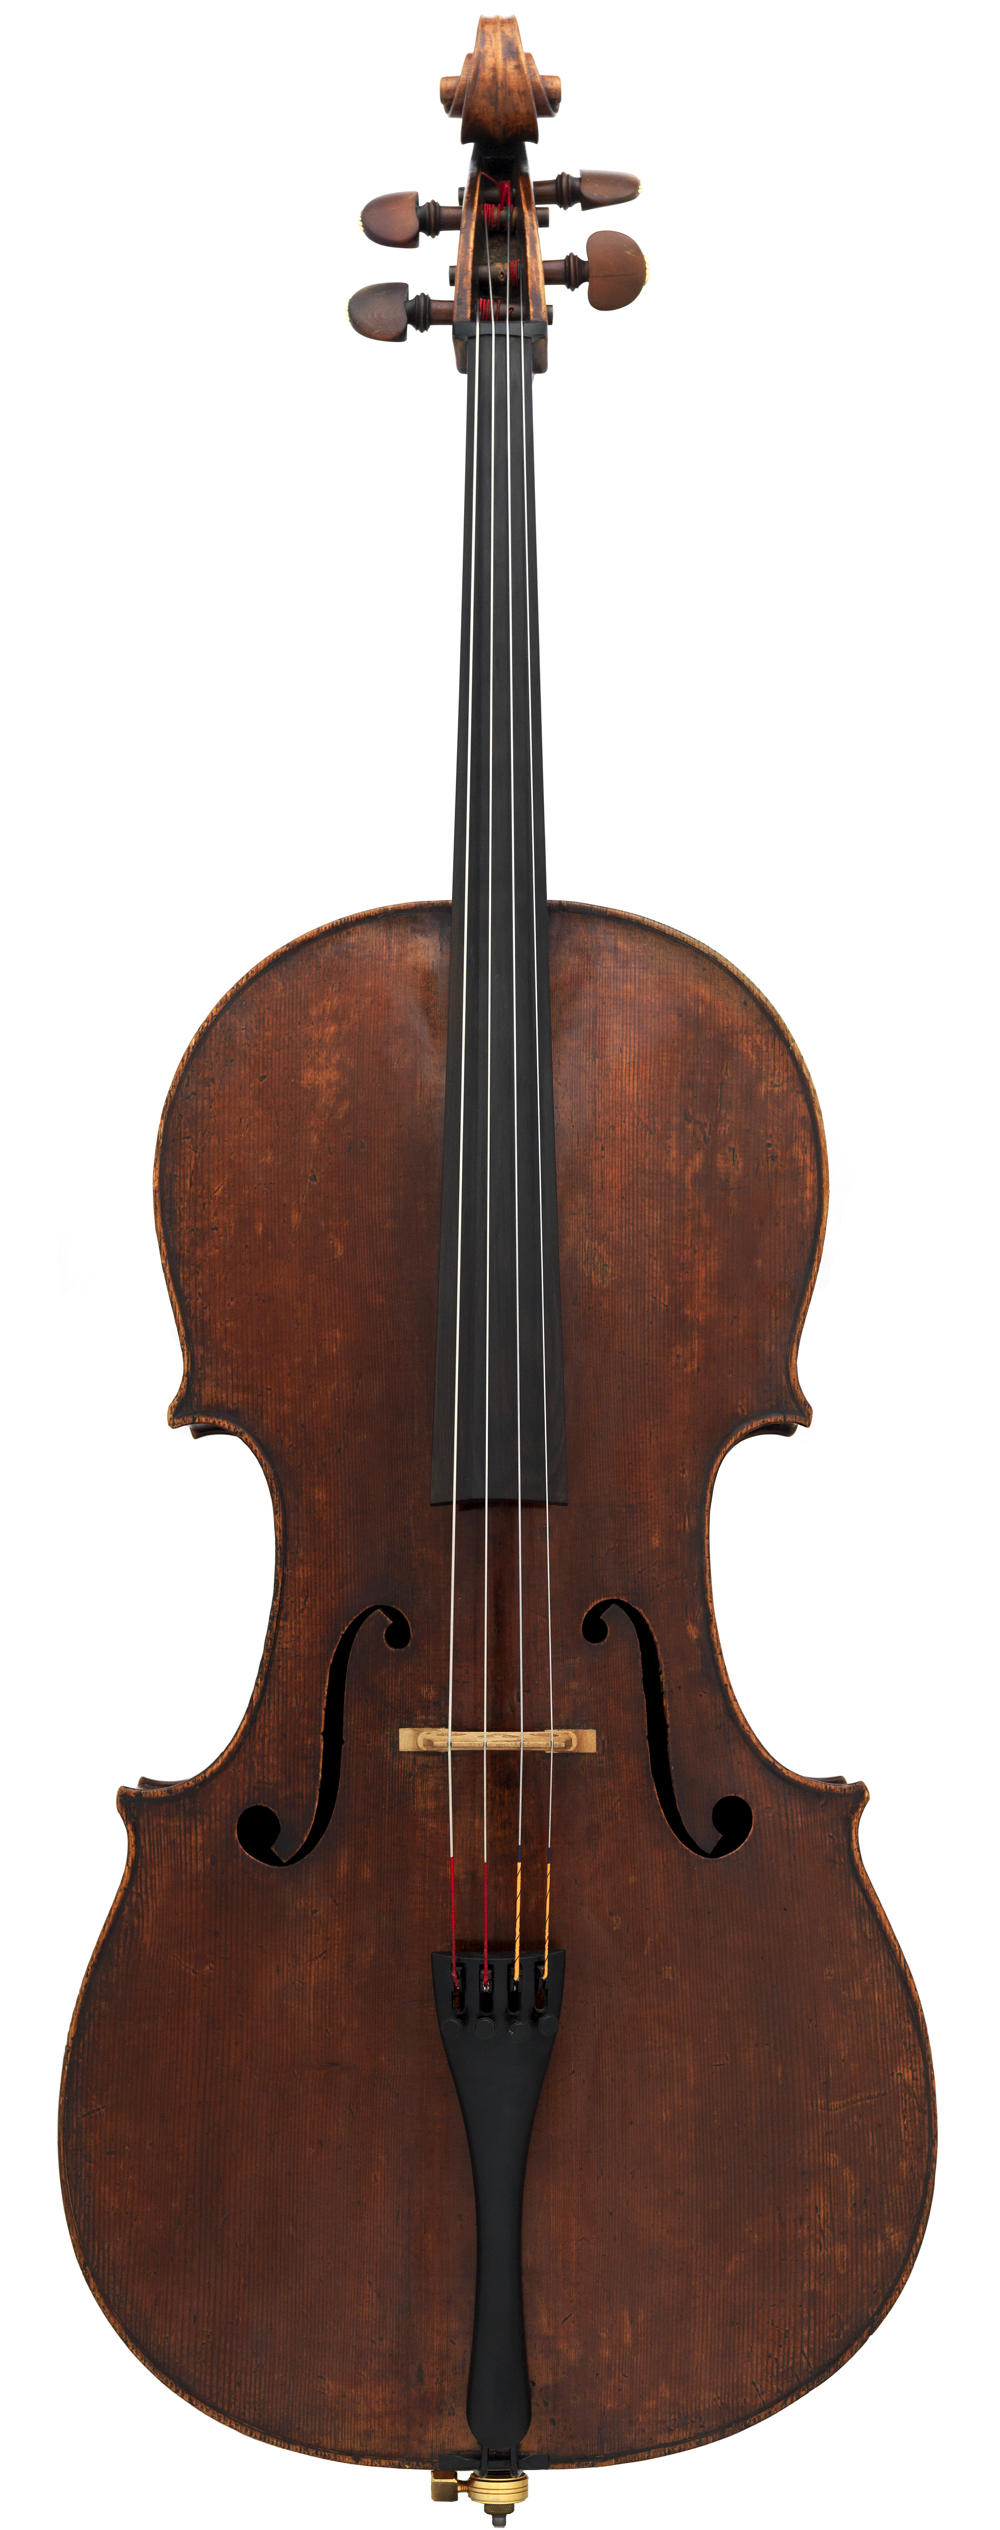 The Pawle is one of the cellos made on the B piccola mould in 1730